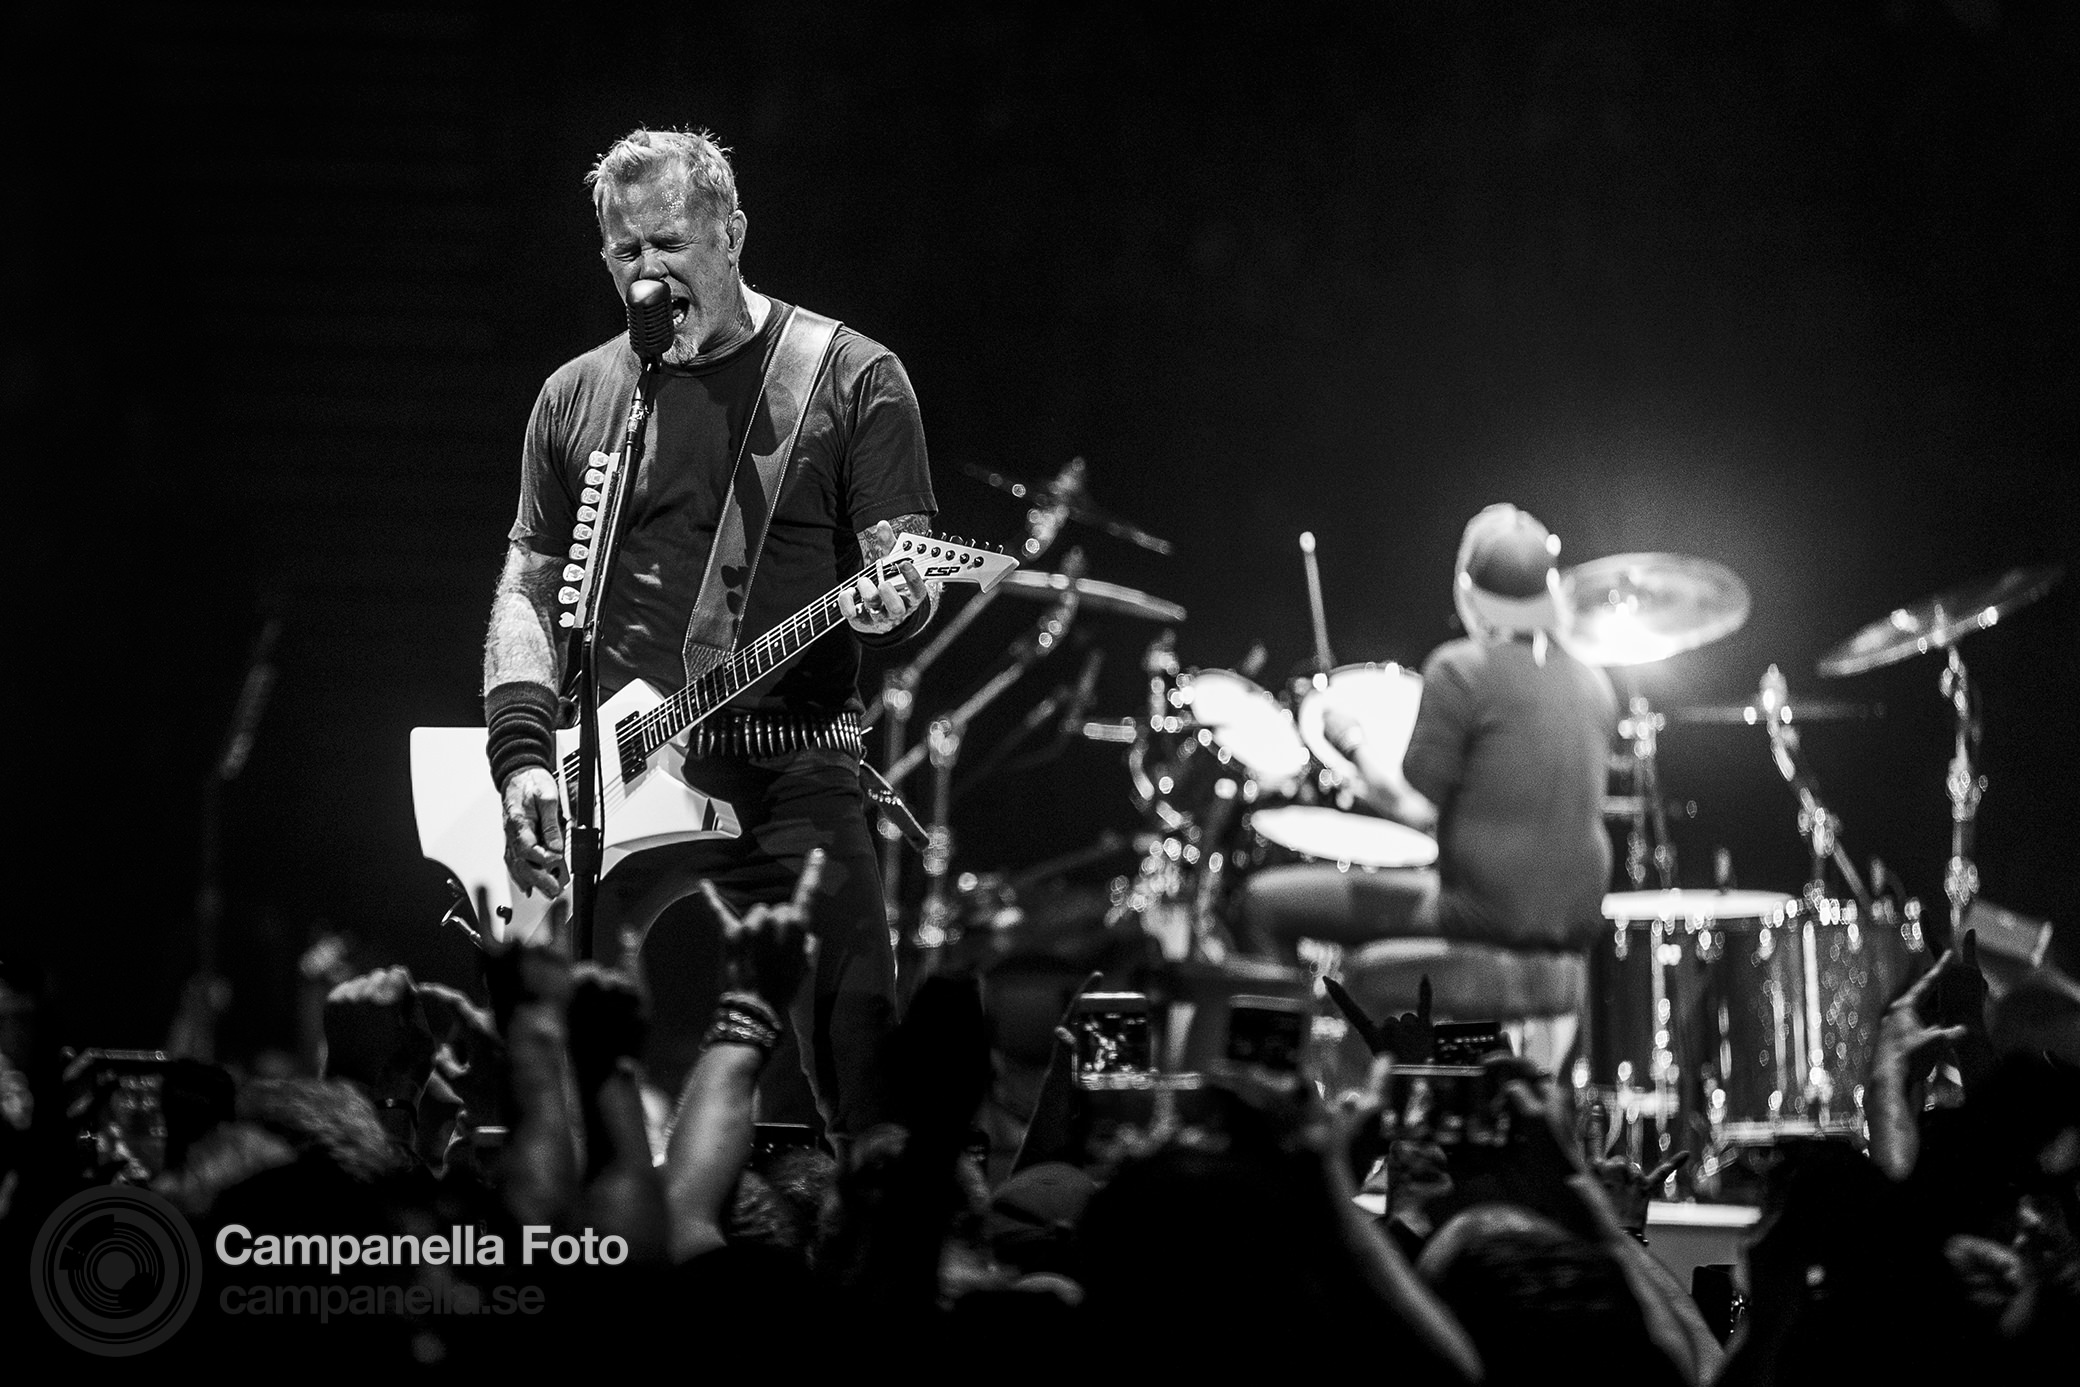 Metallica performs in Stockholm - Michael Campanella Photography